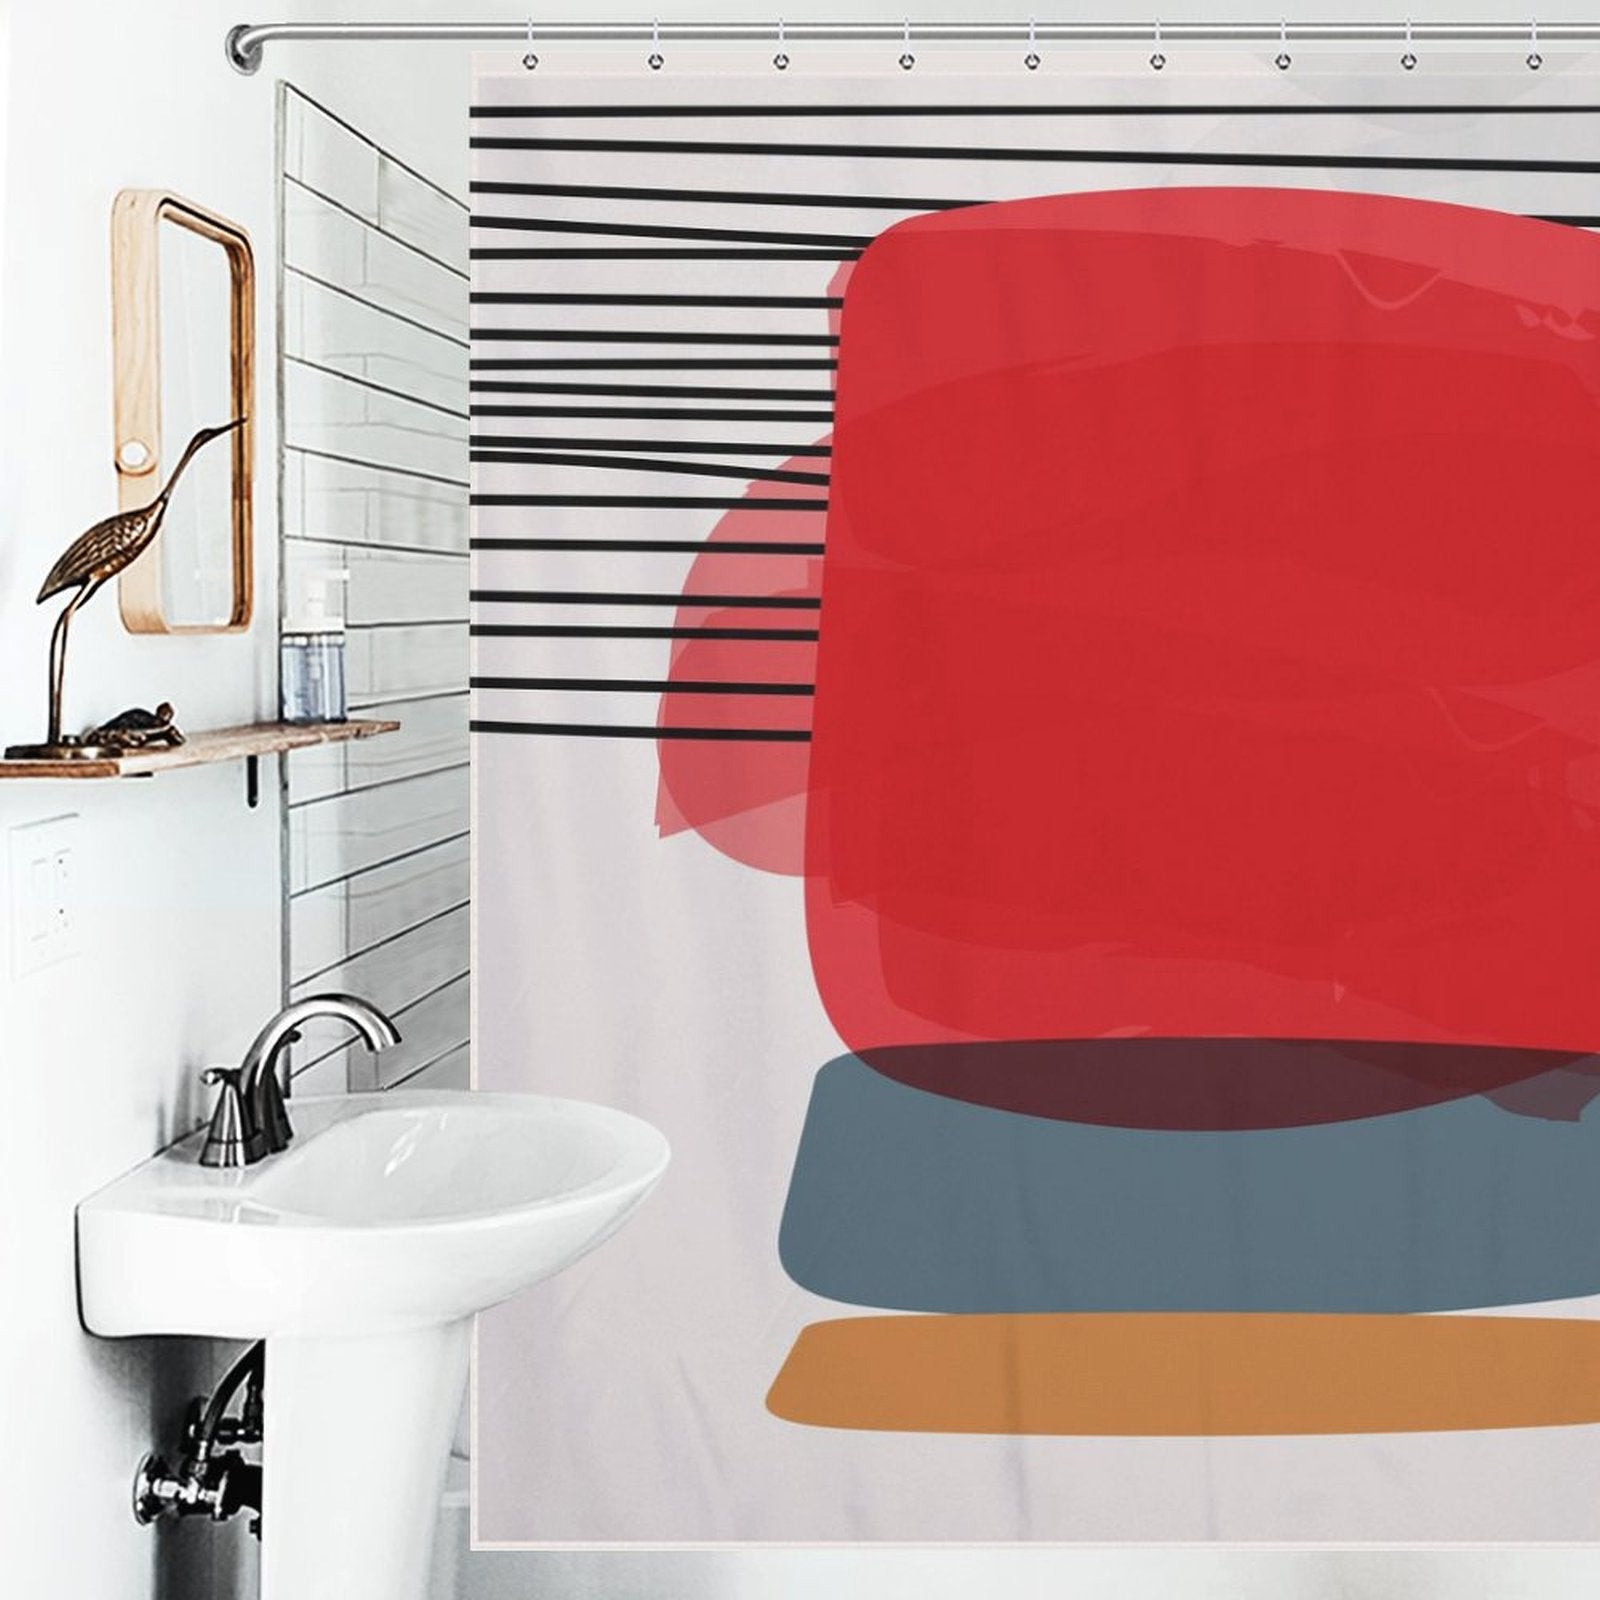 A bathroom with a white sink, a mirror, and a Modern Geometric Art Minimalist Simple Red Blue Orange Abstract Shower Curtain-Cottoncat by Cotton Cat featuring abstract shapes in red, blue, and yellow, with black horizontal lines.